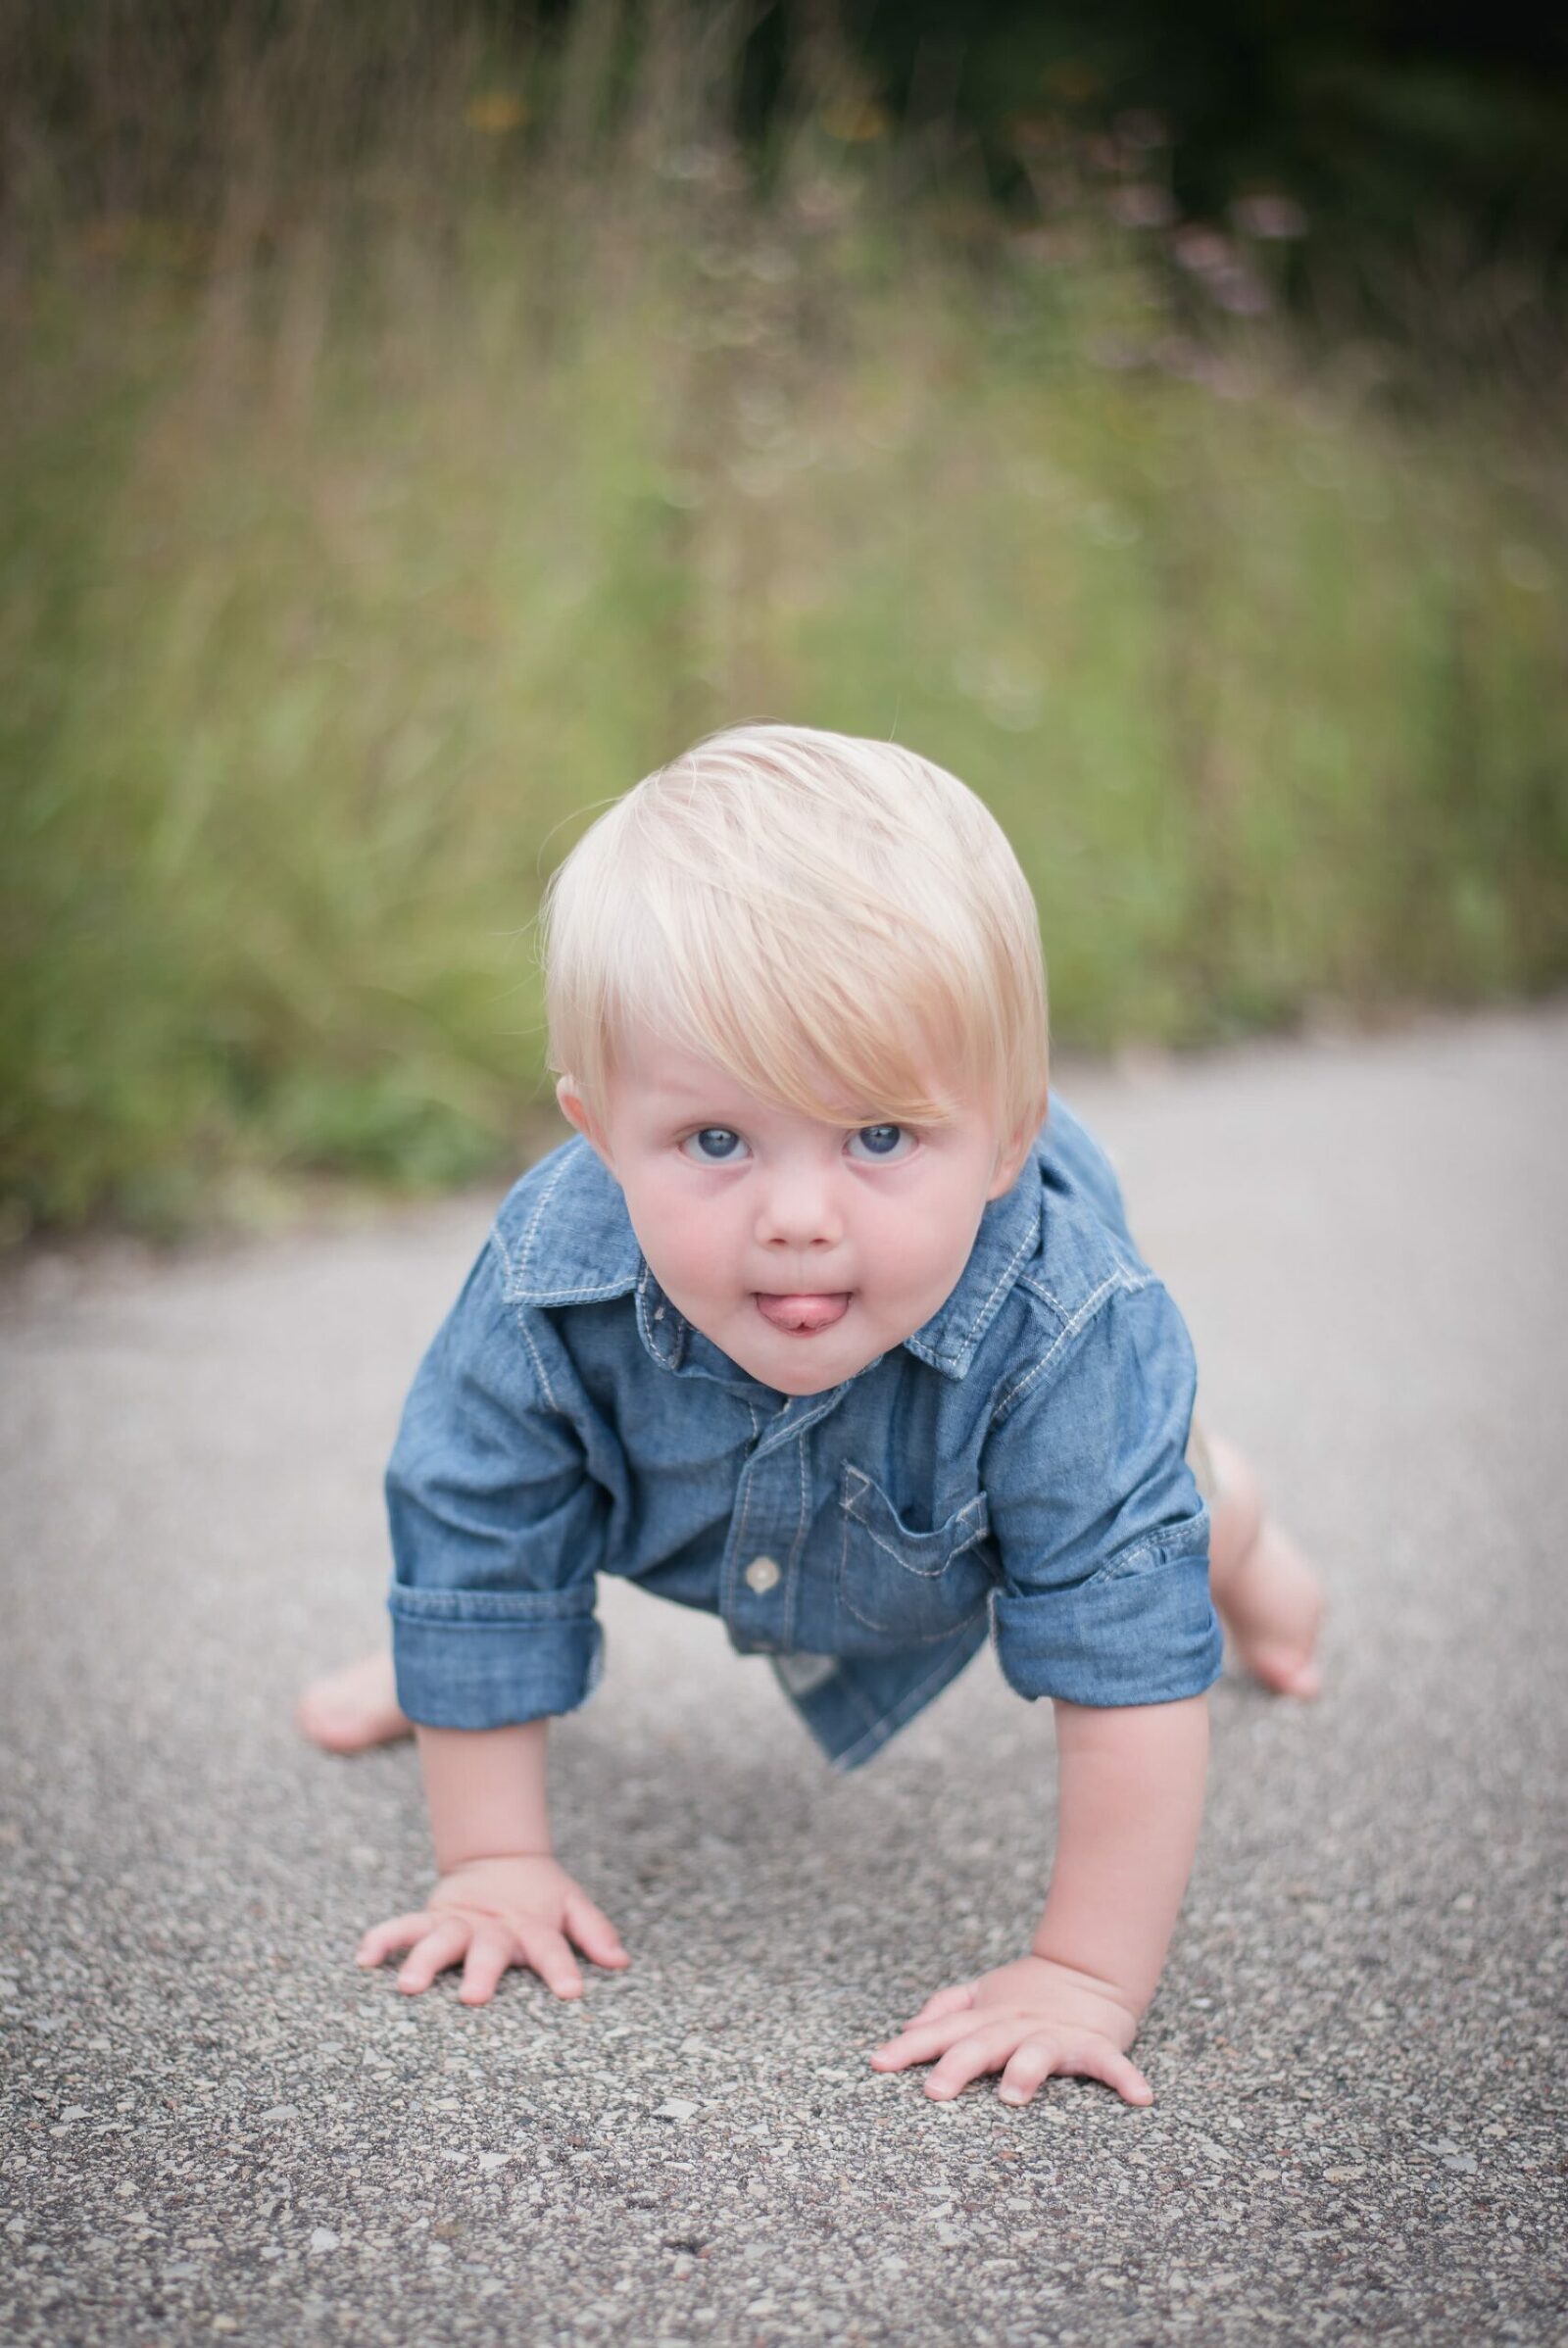 9 month old boy on all fours sticking out tongue looking at camera